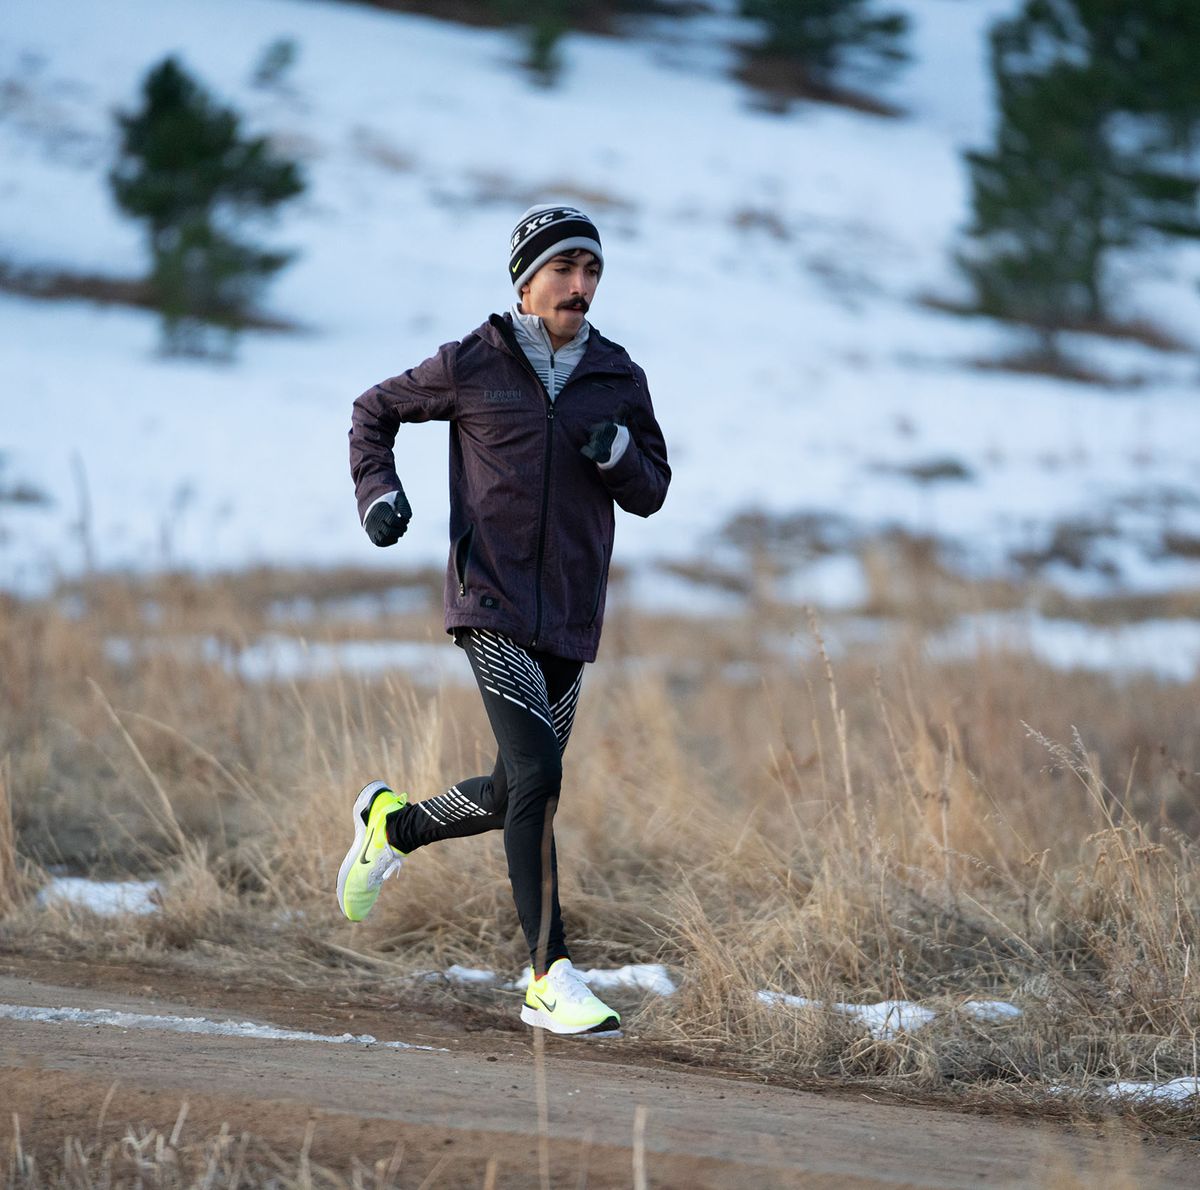 Best winter running gear for men from Nike, Adidas, Under Armour and more